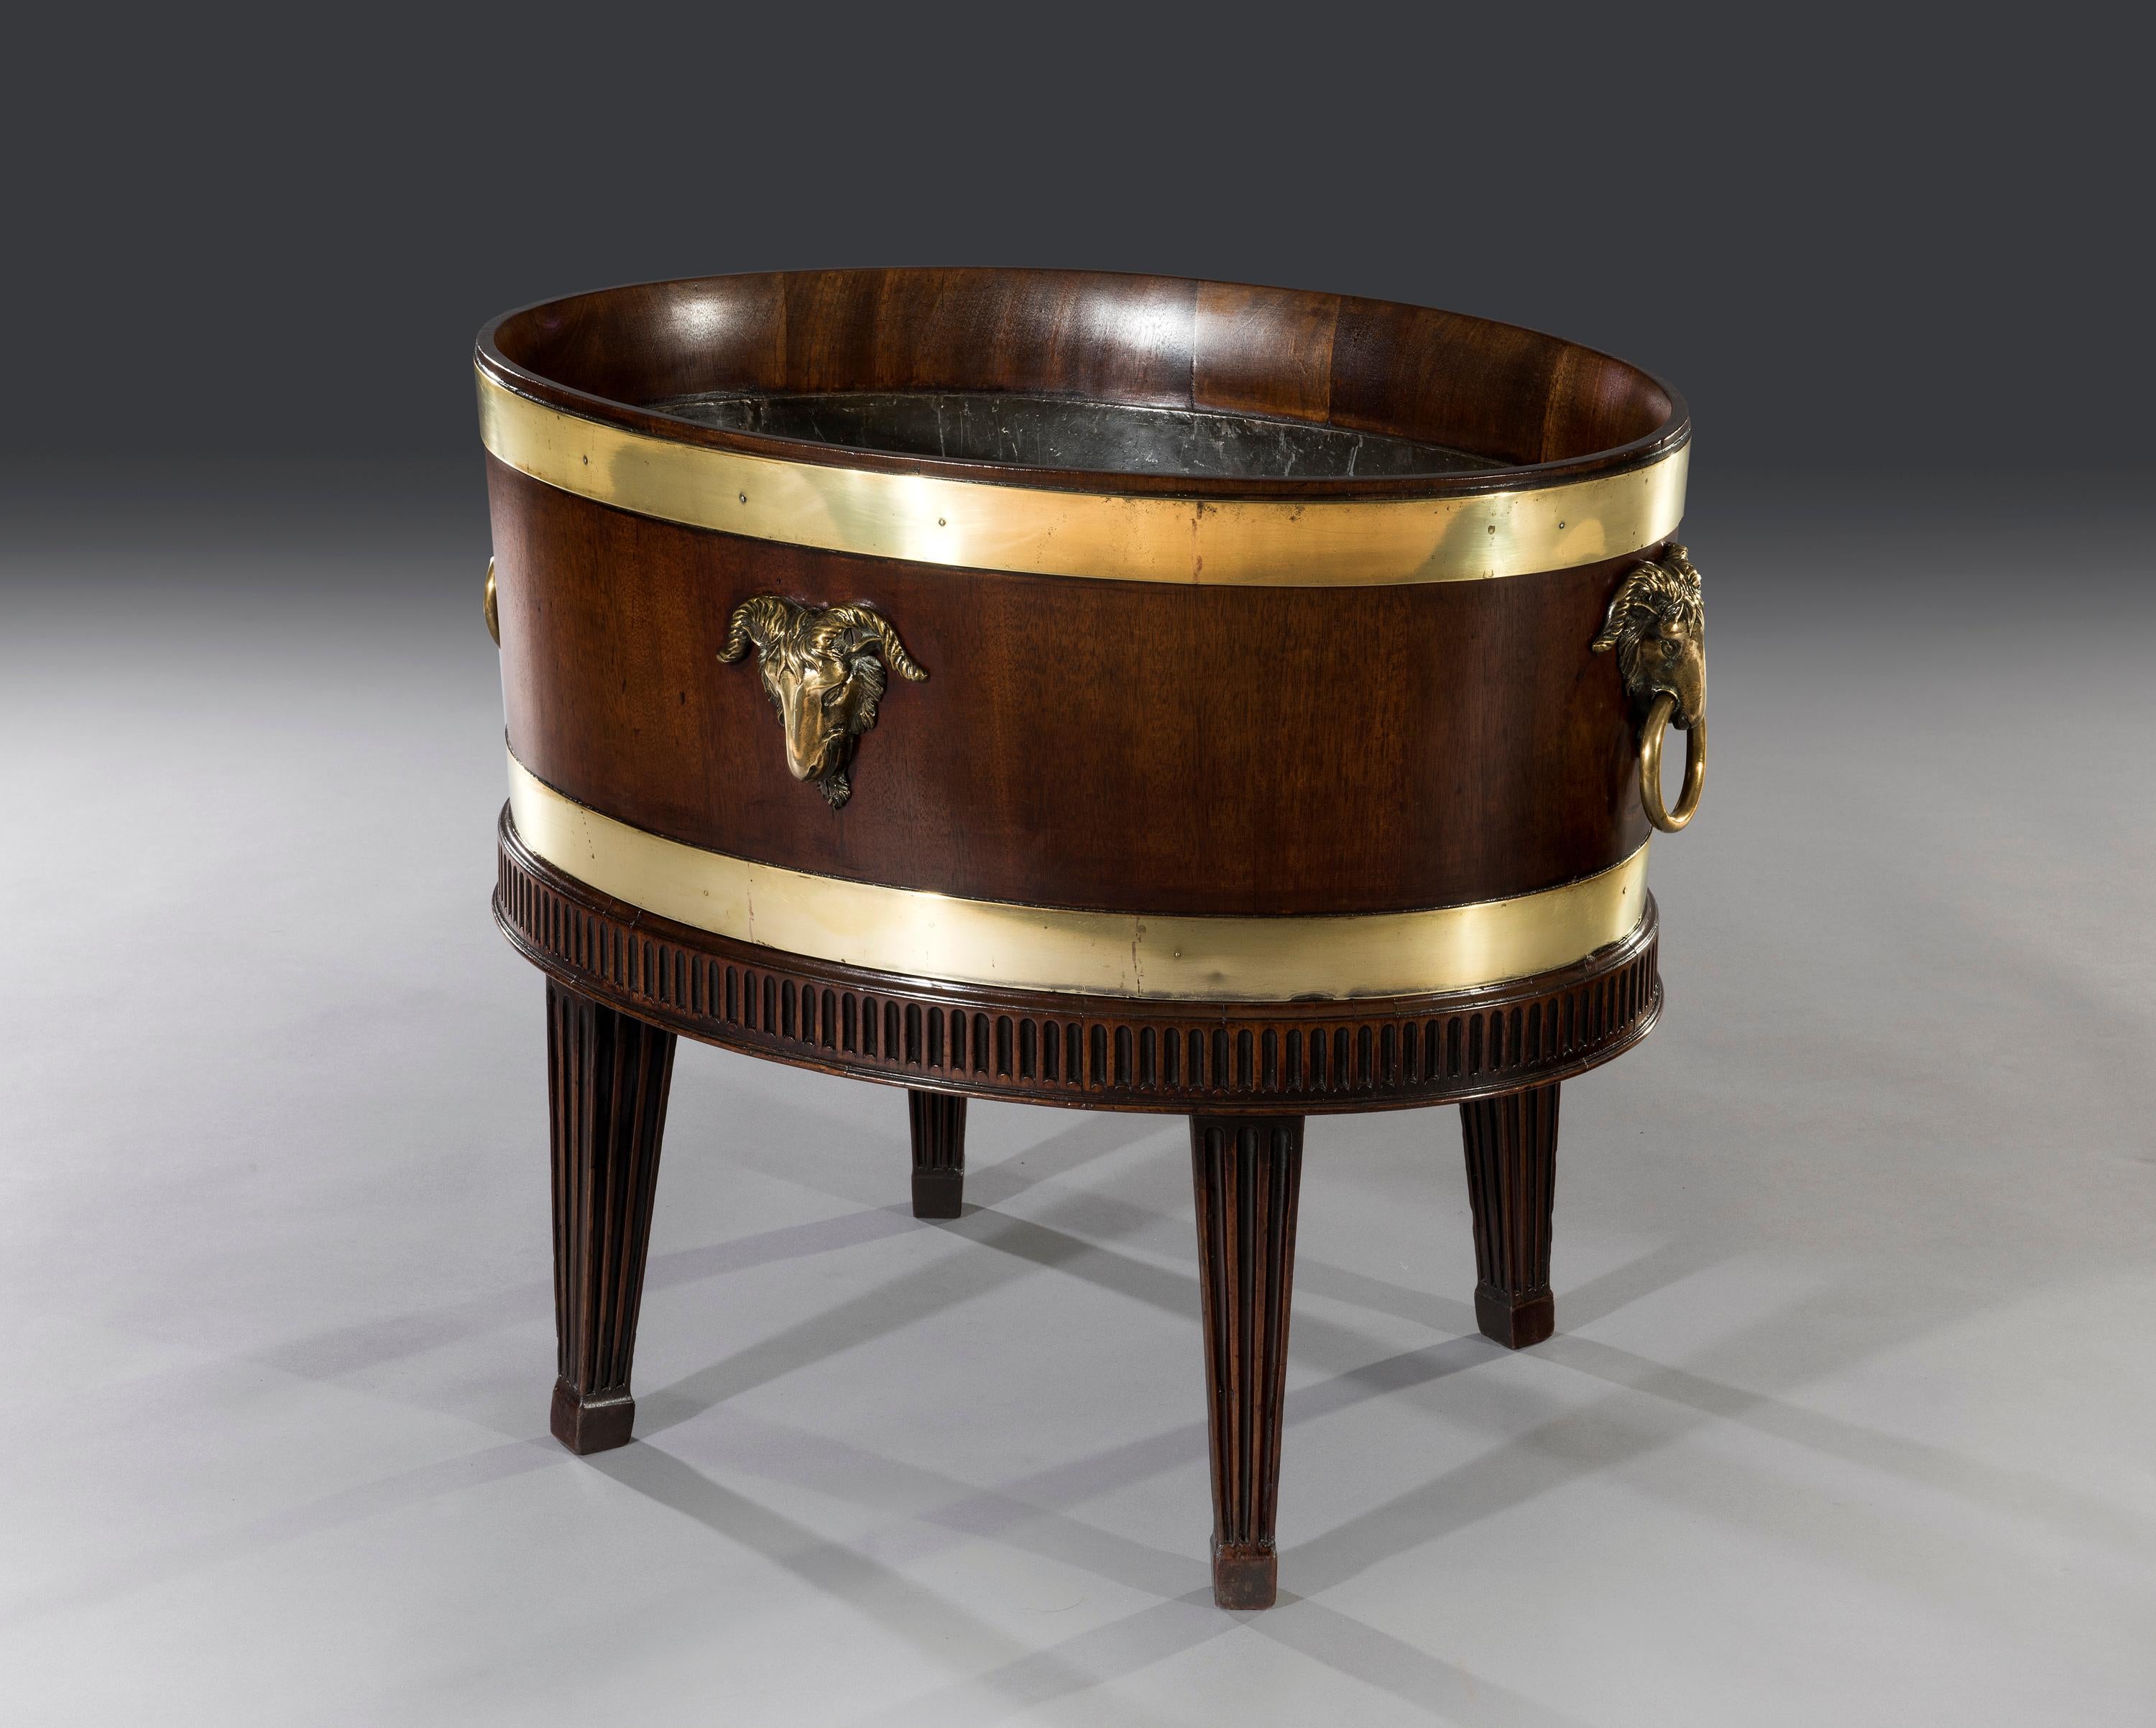 The mahogany oval shaped lead lined wine cooler has brass bands and is decorated with four ram's head brass fittings. The detachable mahogany base with a fluted frieze and fluted square tapered legs terminates on block feet.

The cooler has a dual